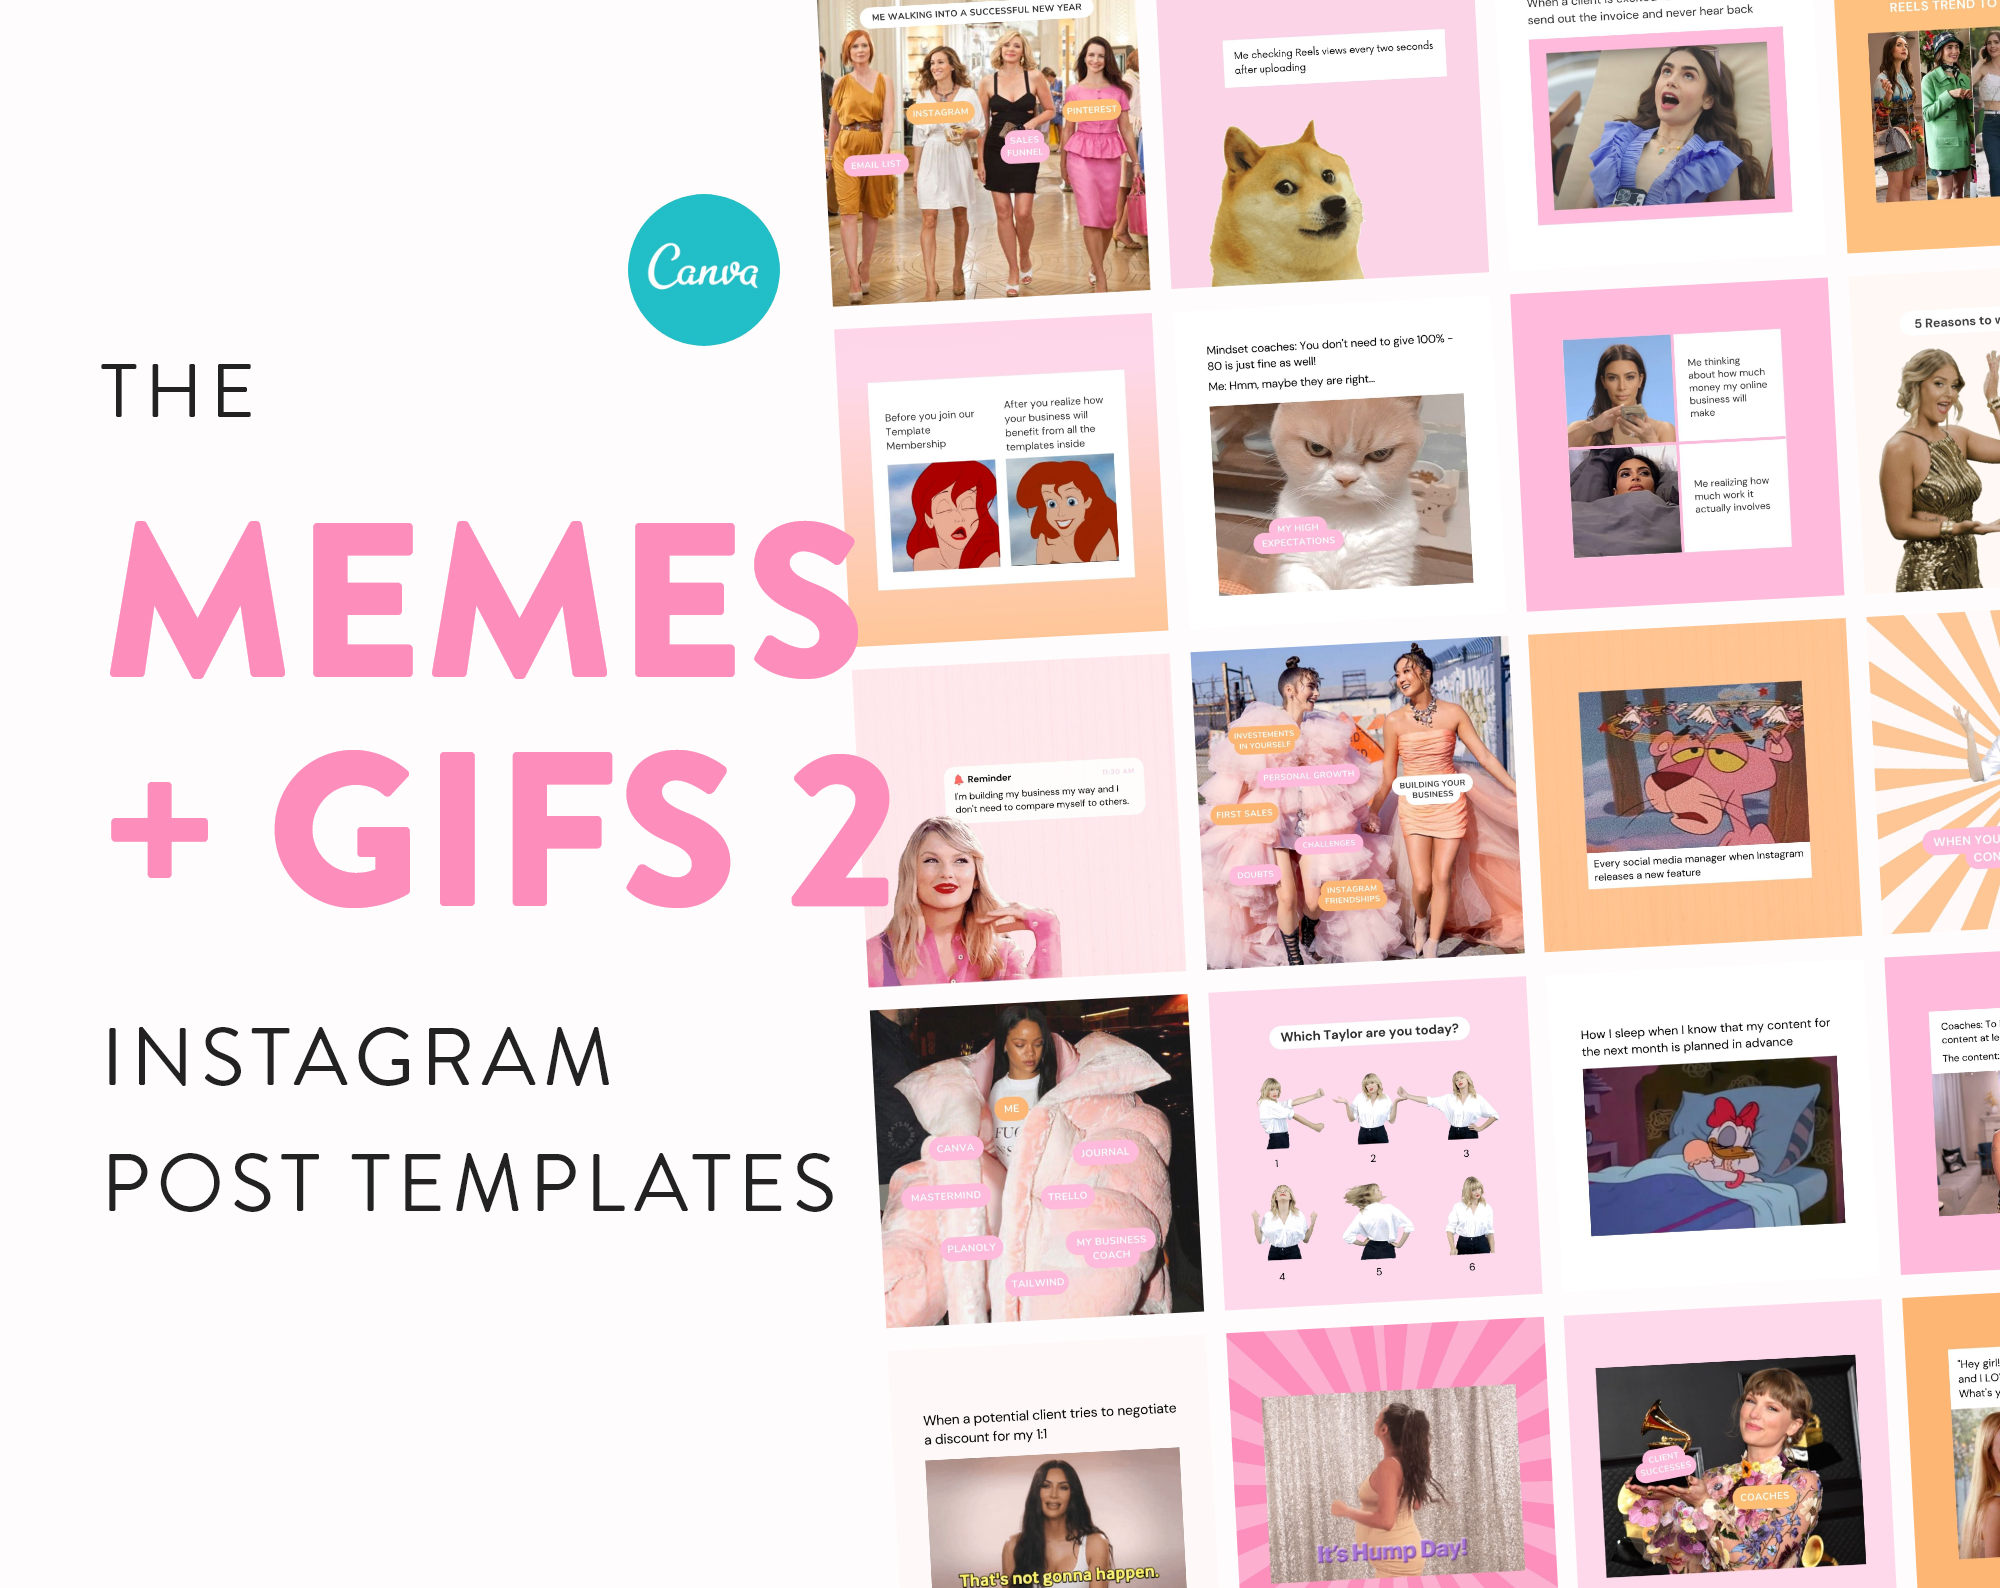 memes-gifs-Instagram-feed-post-templates-canva-2